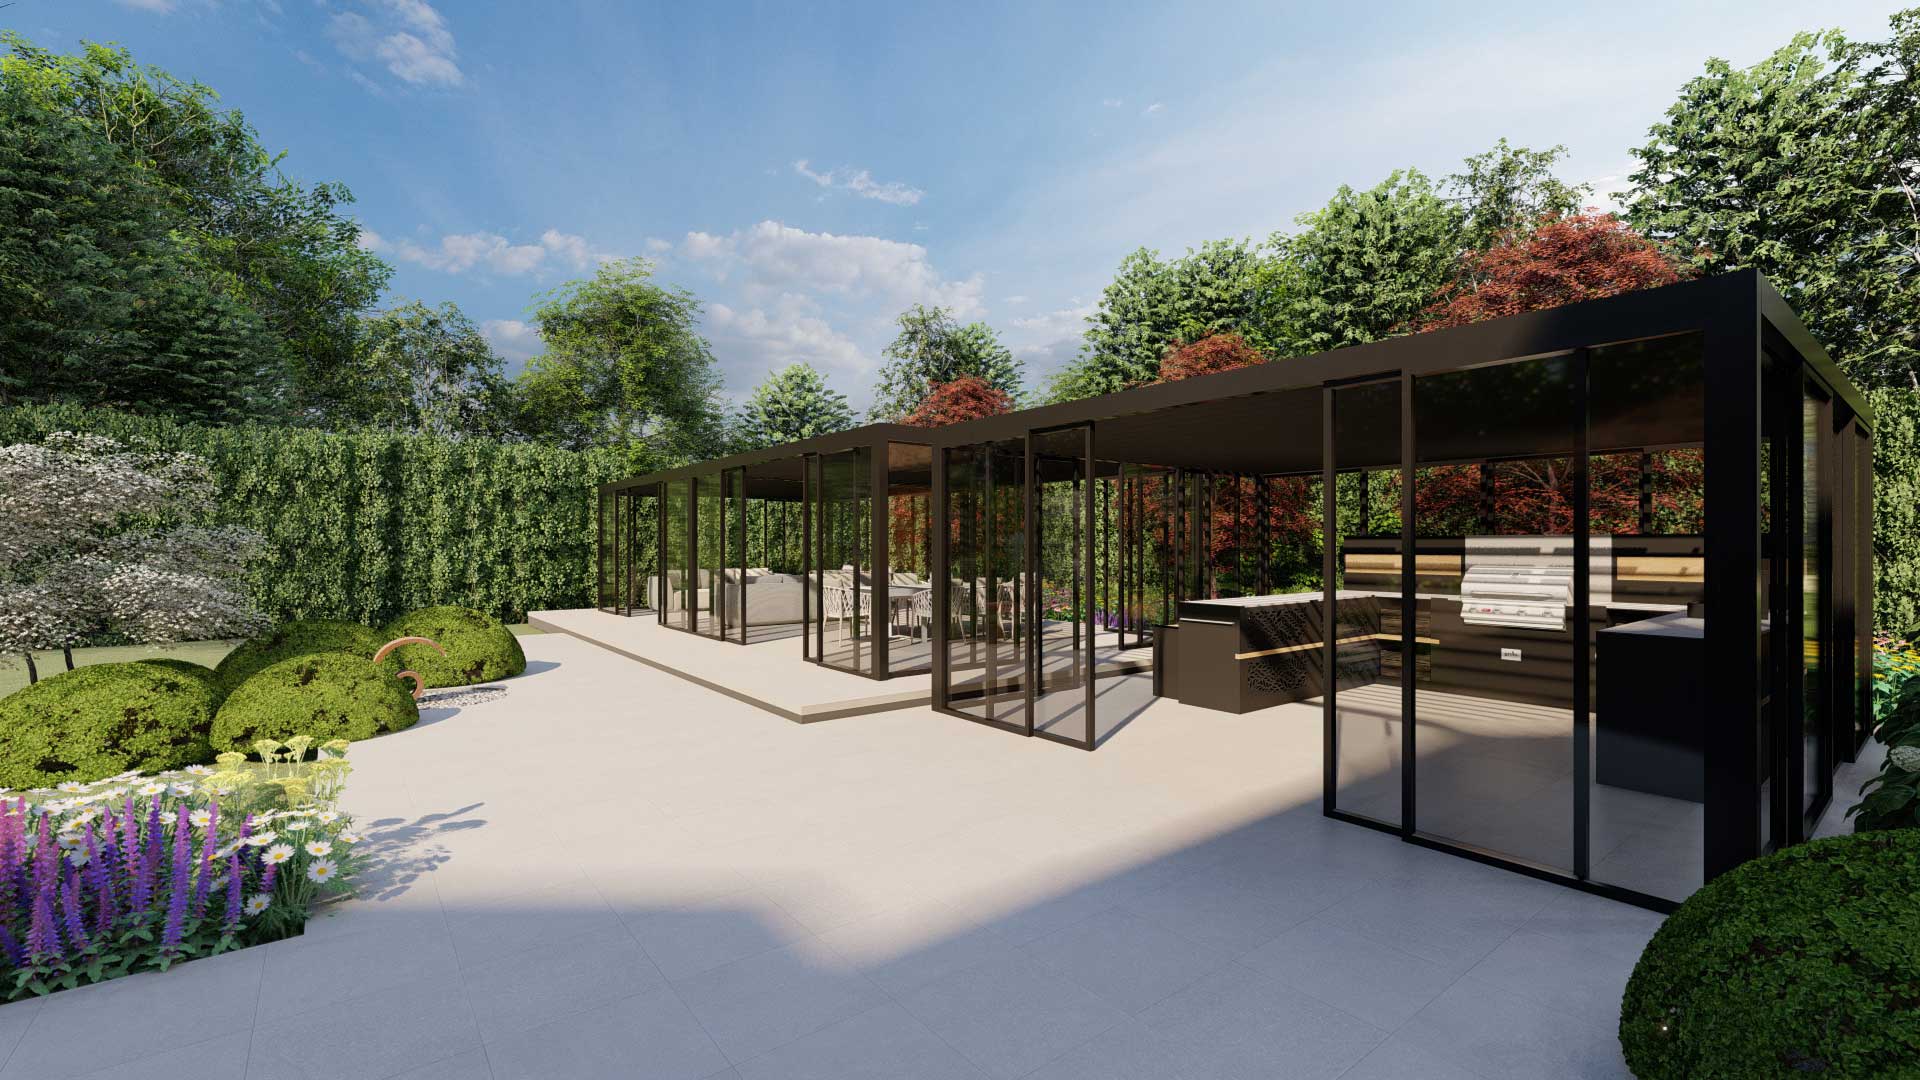 large entertaining garden with a bespoke pergola and lots of seating for guests